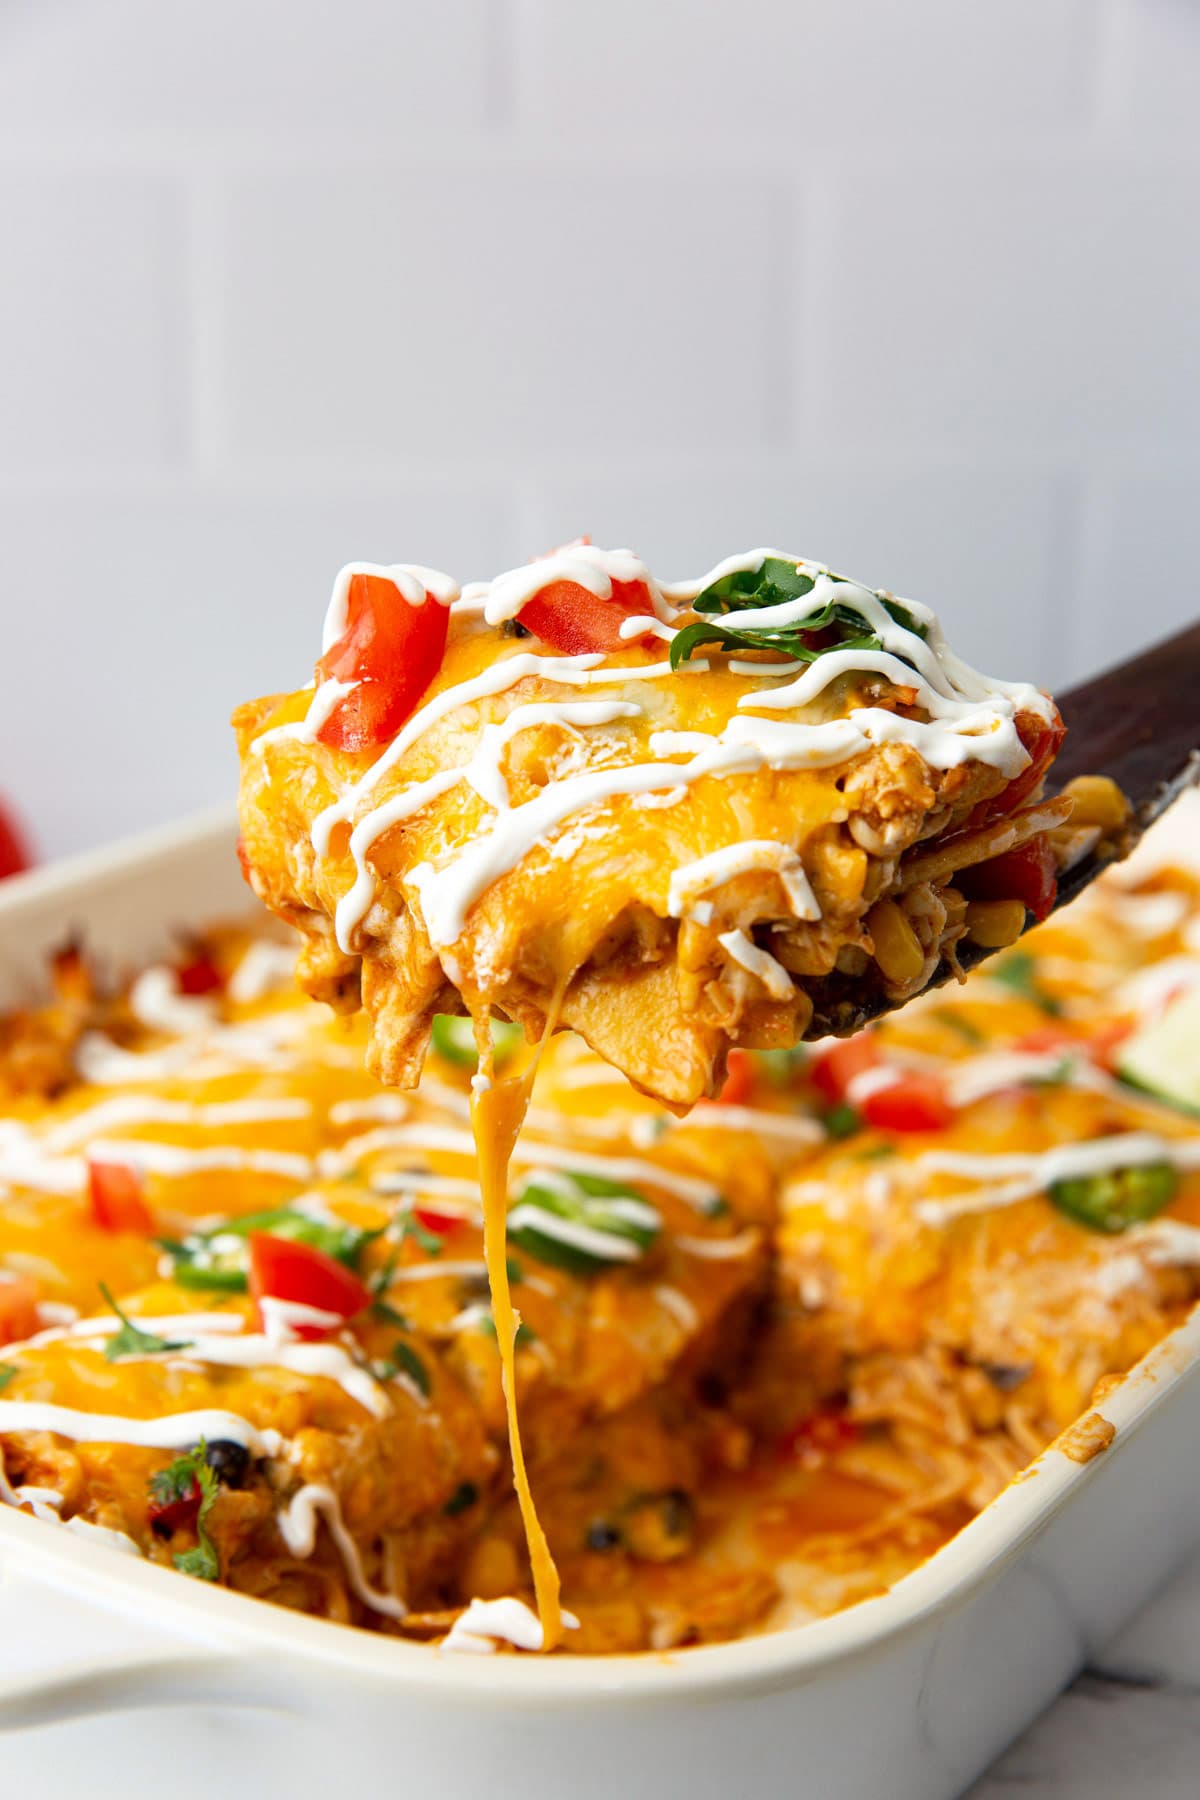 A hearty slice of chicken enchilada casserole lifted out of a white 9x13 casserole pan.